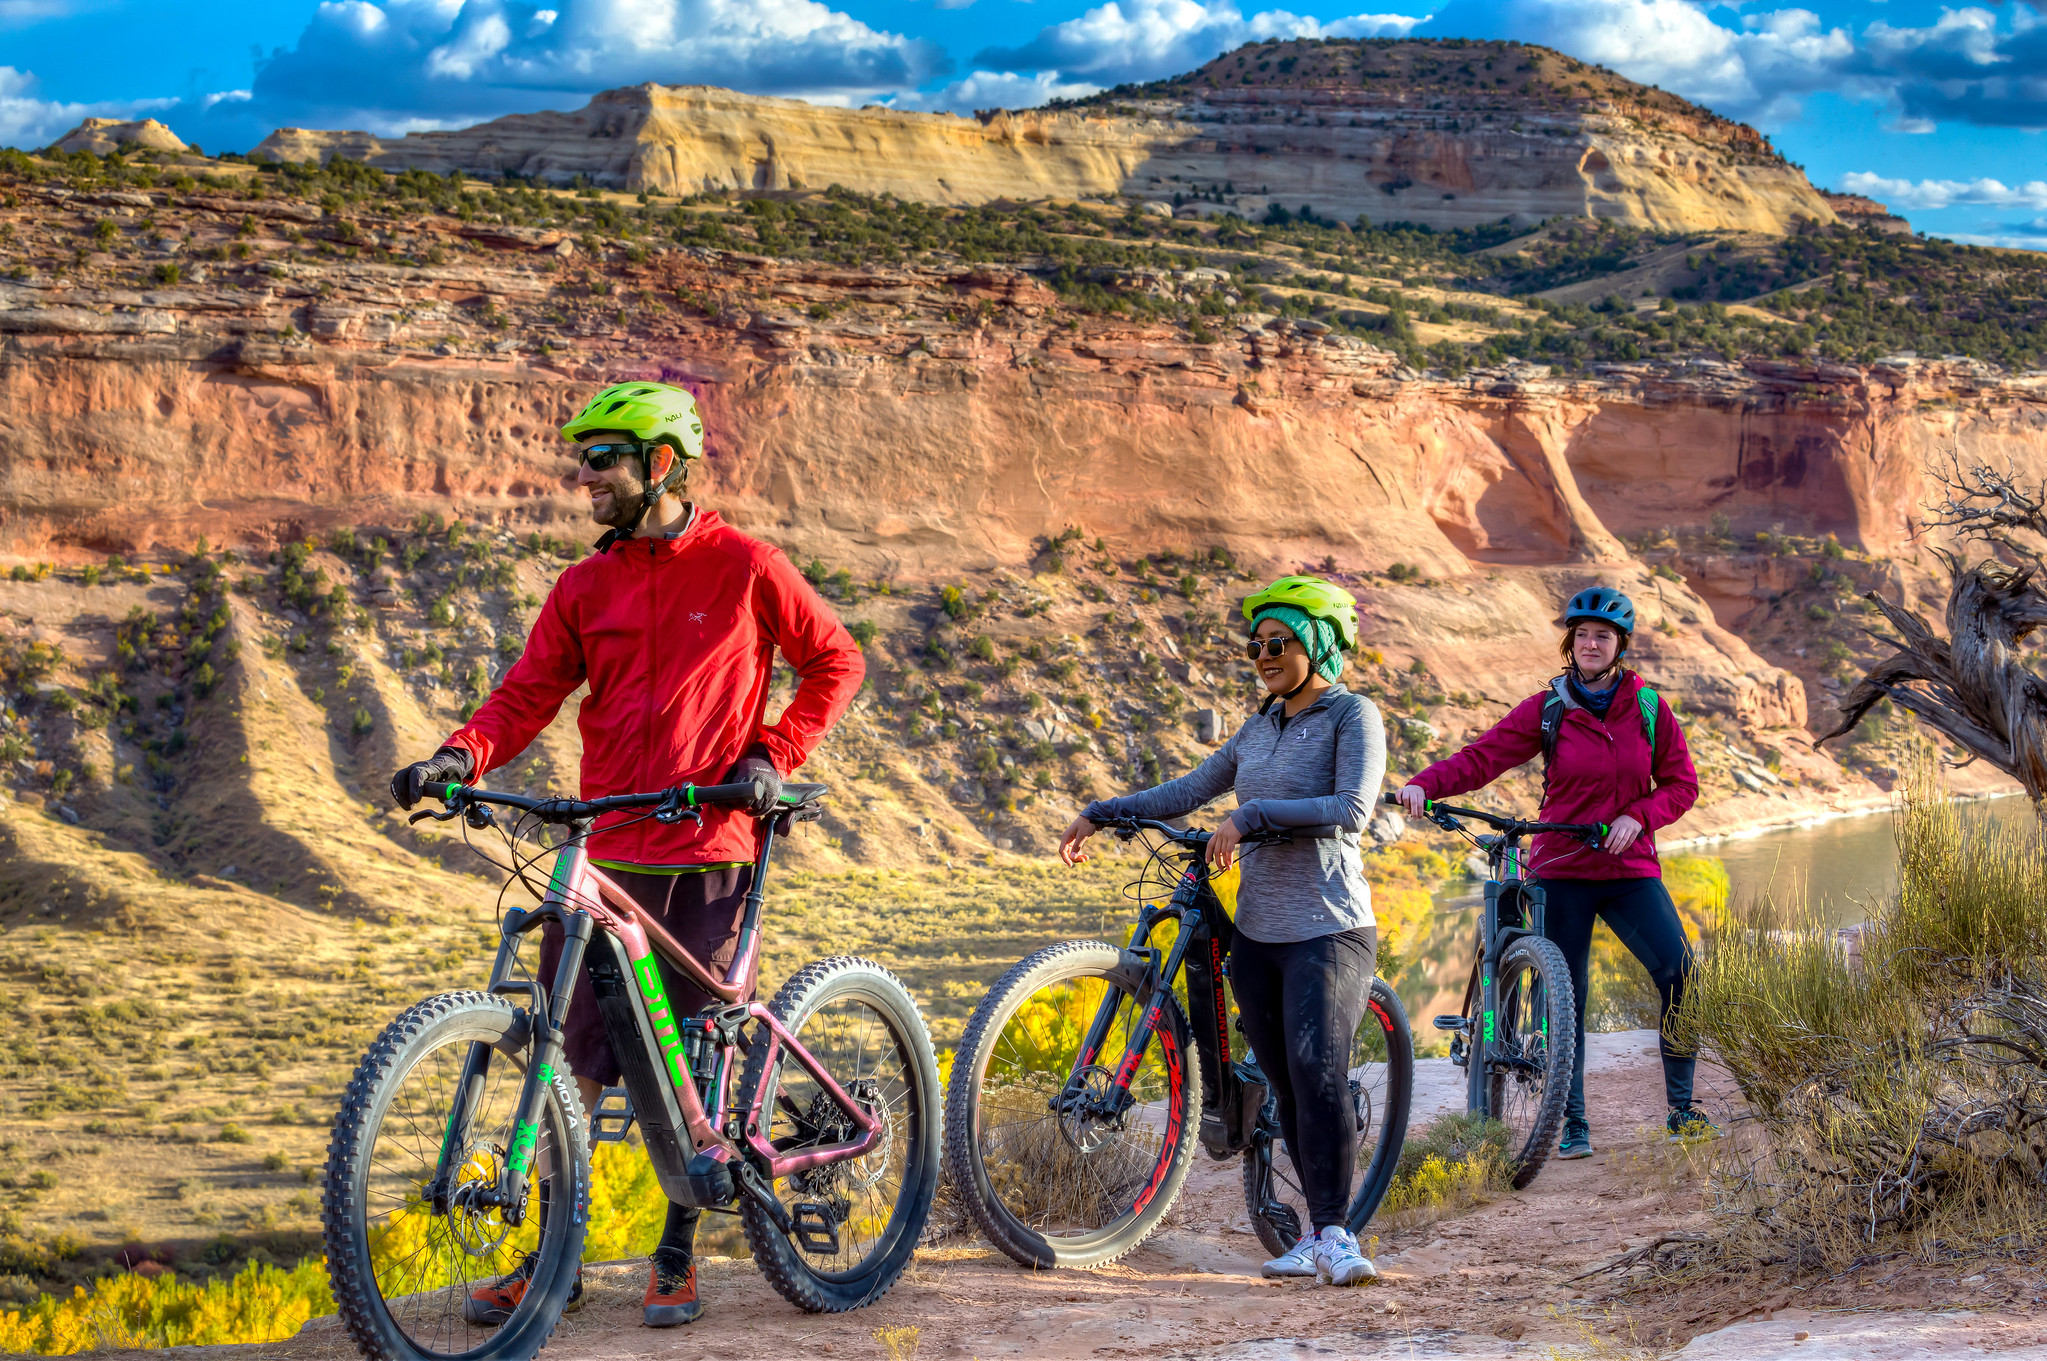 Three people wearing helmets and riding gear stand next to bikes on a dirt trail with a large mesa in the background.